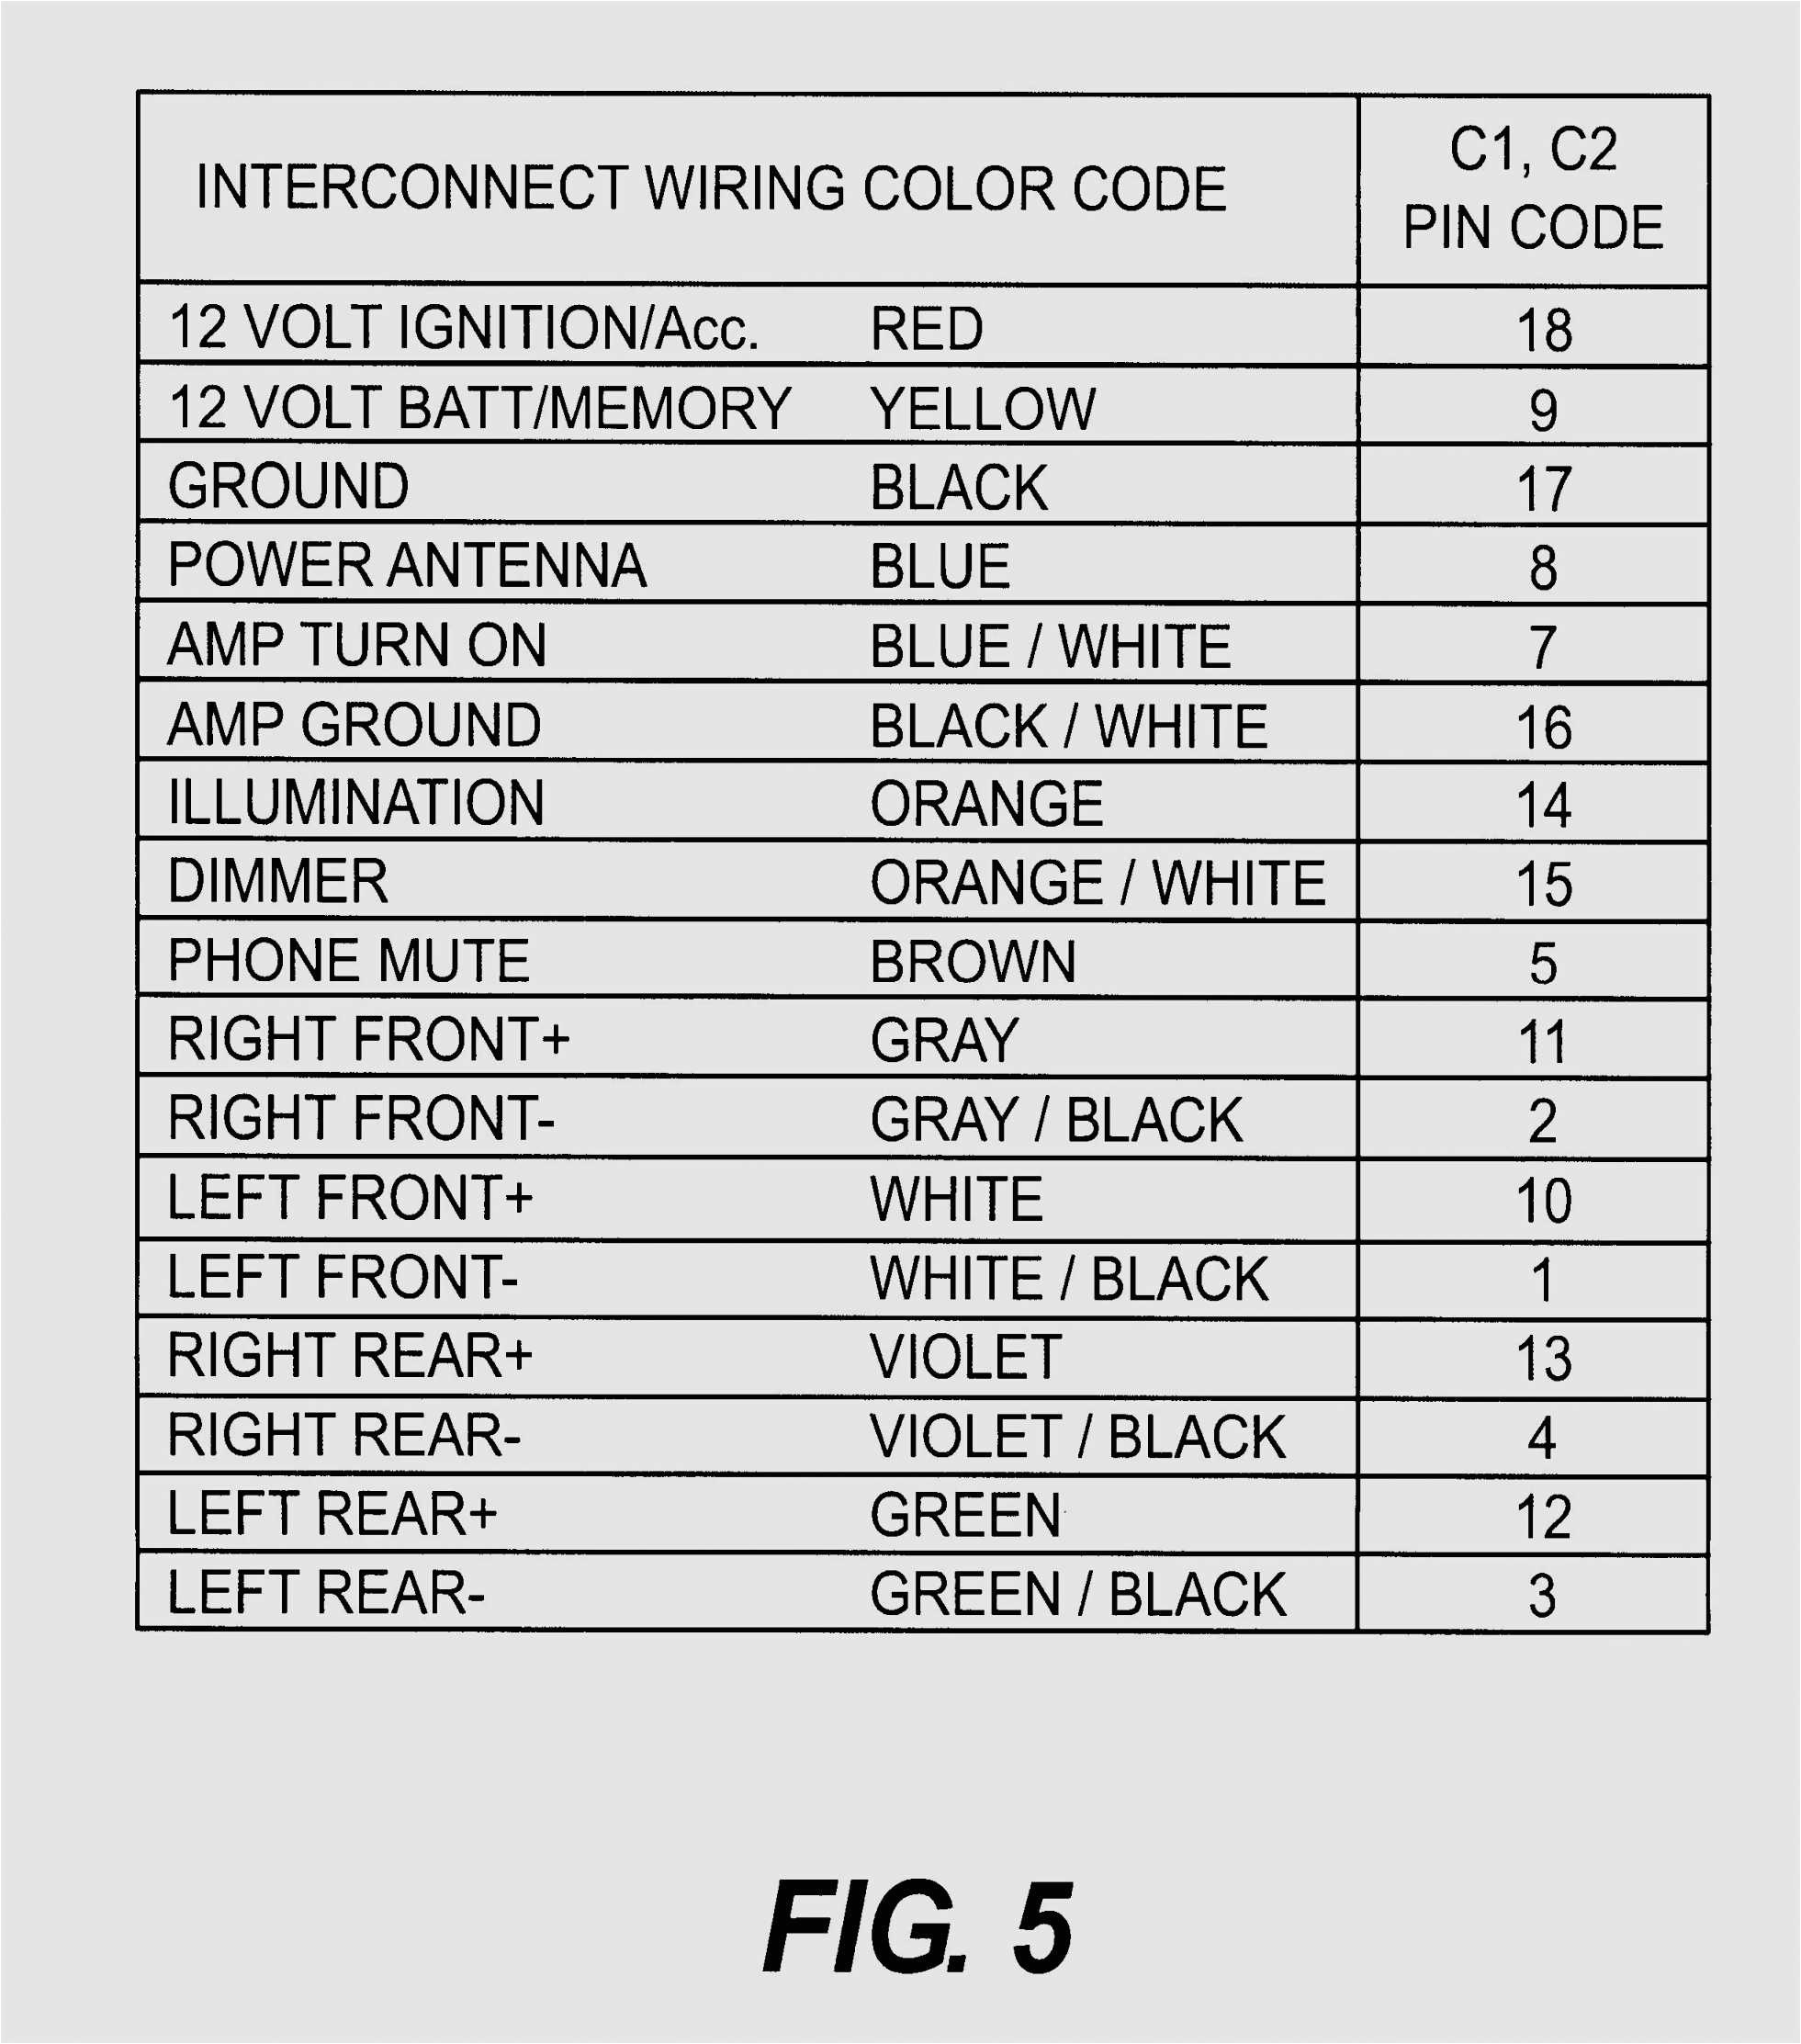 Vt Stereo Wiring Diagram sony Stereo Wiring Diagram ford Wiring Diagram Basic